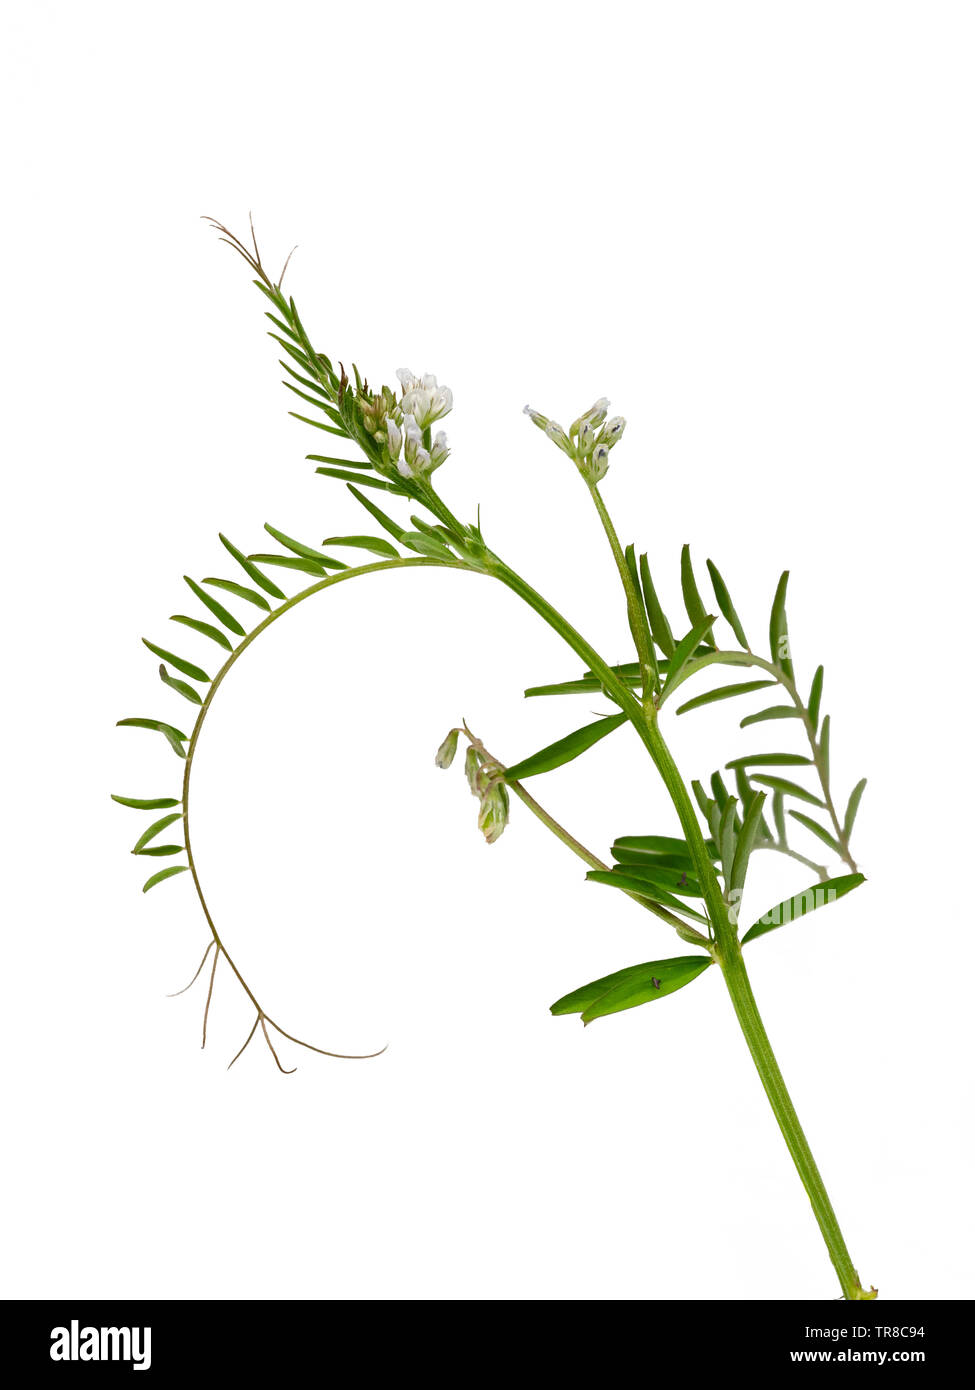 Green foliage, brown tendrils and small purple striped white flowers of the annual green manure crop, Vicia hirsuta, hairy tare, on a white background Stock Photo